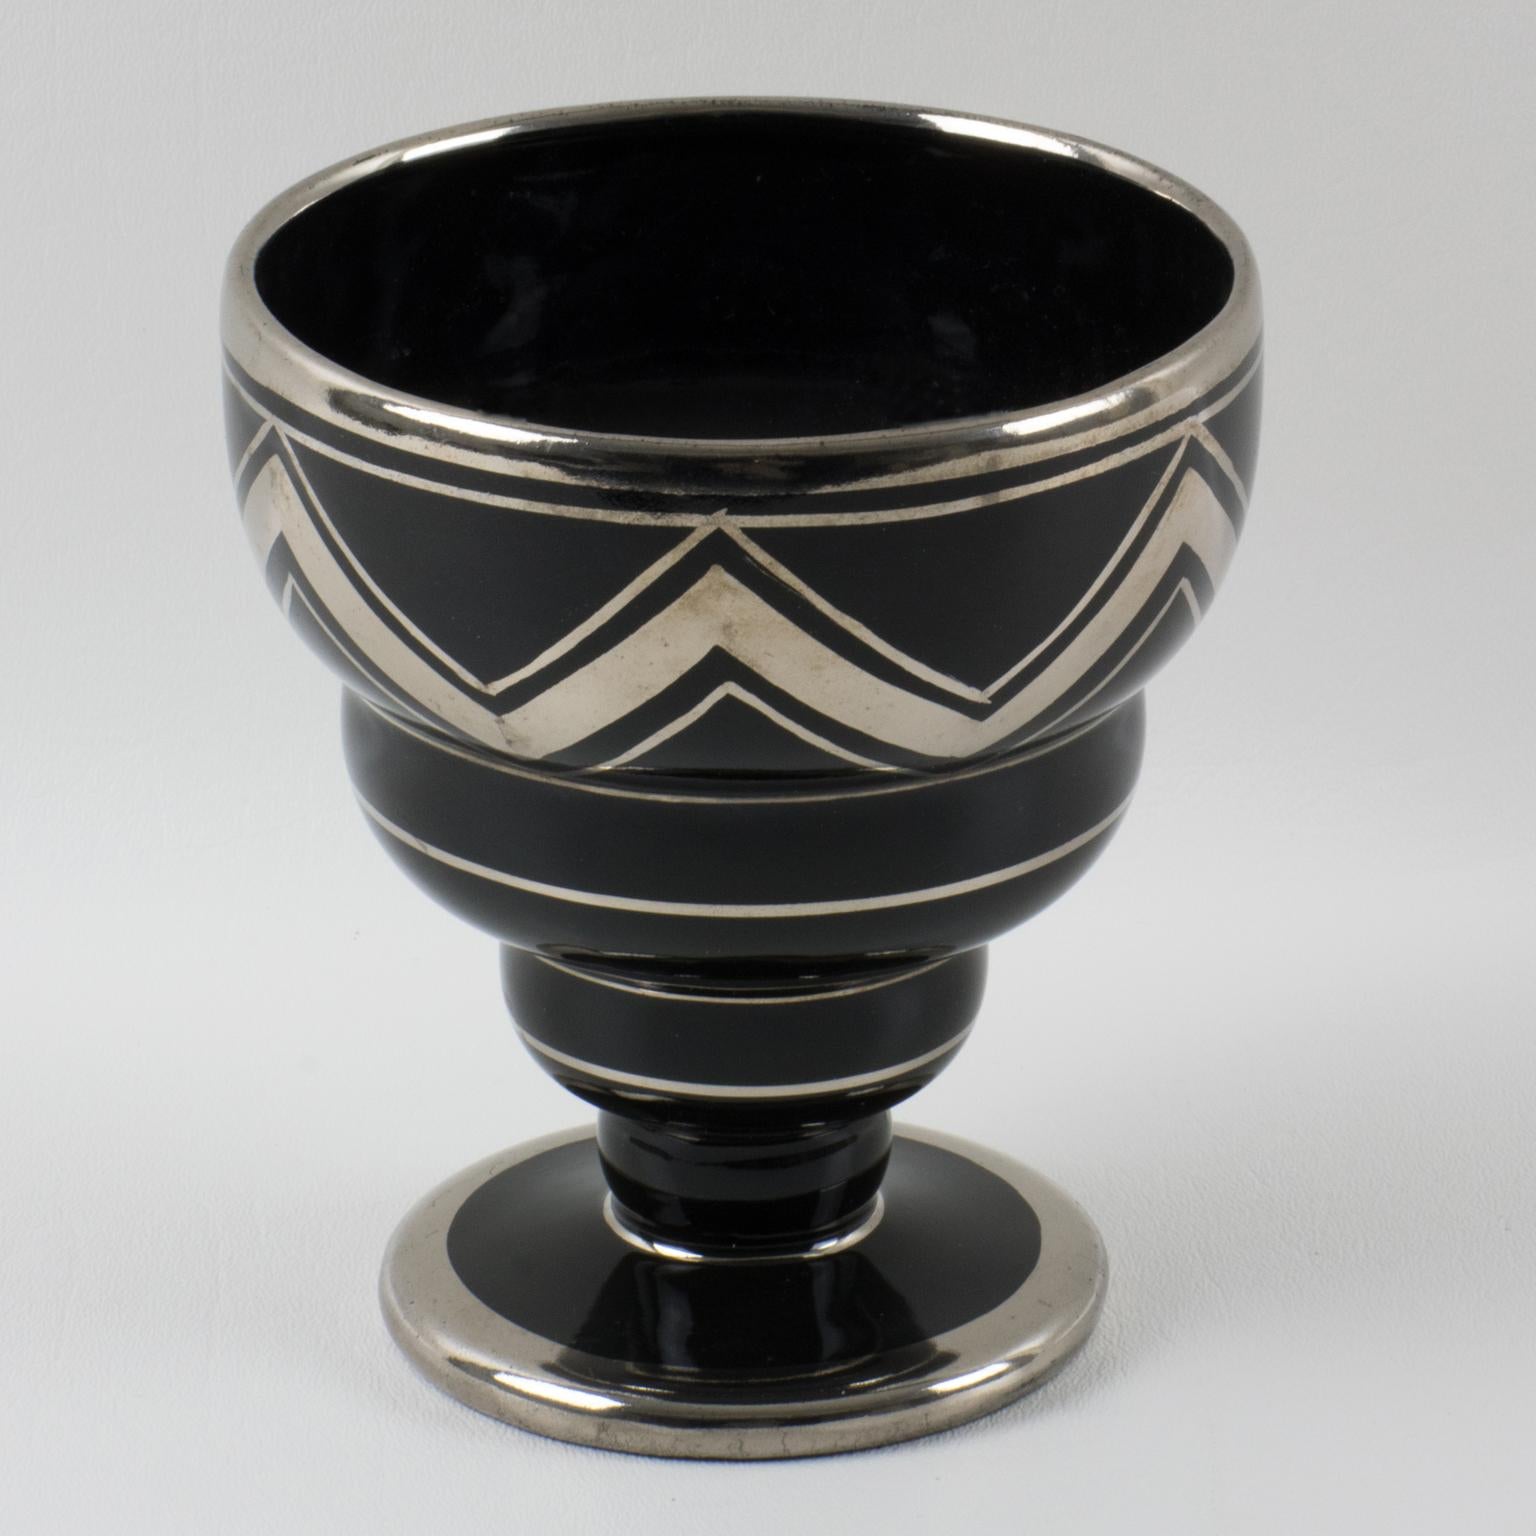 French Art Deco Silver Overlay and Black Ceramic Vase by Ceram France, 1930s